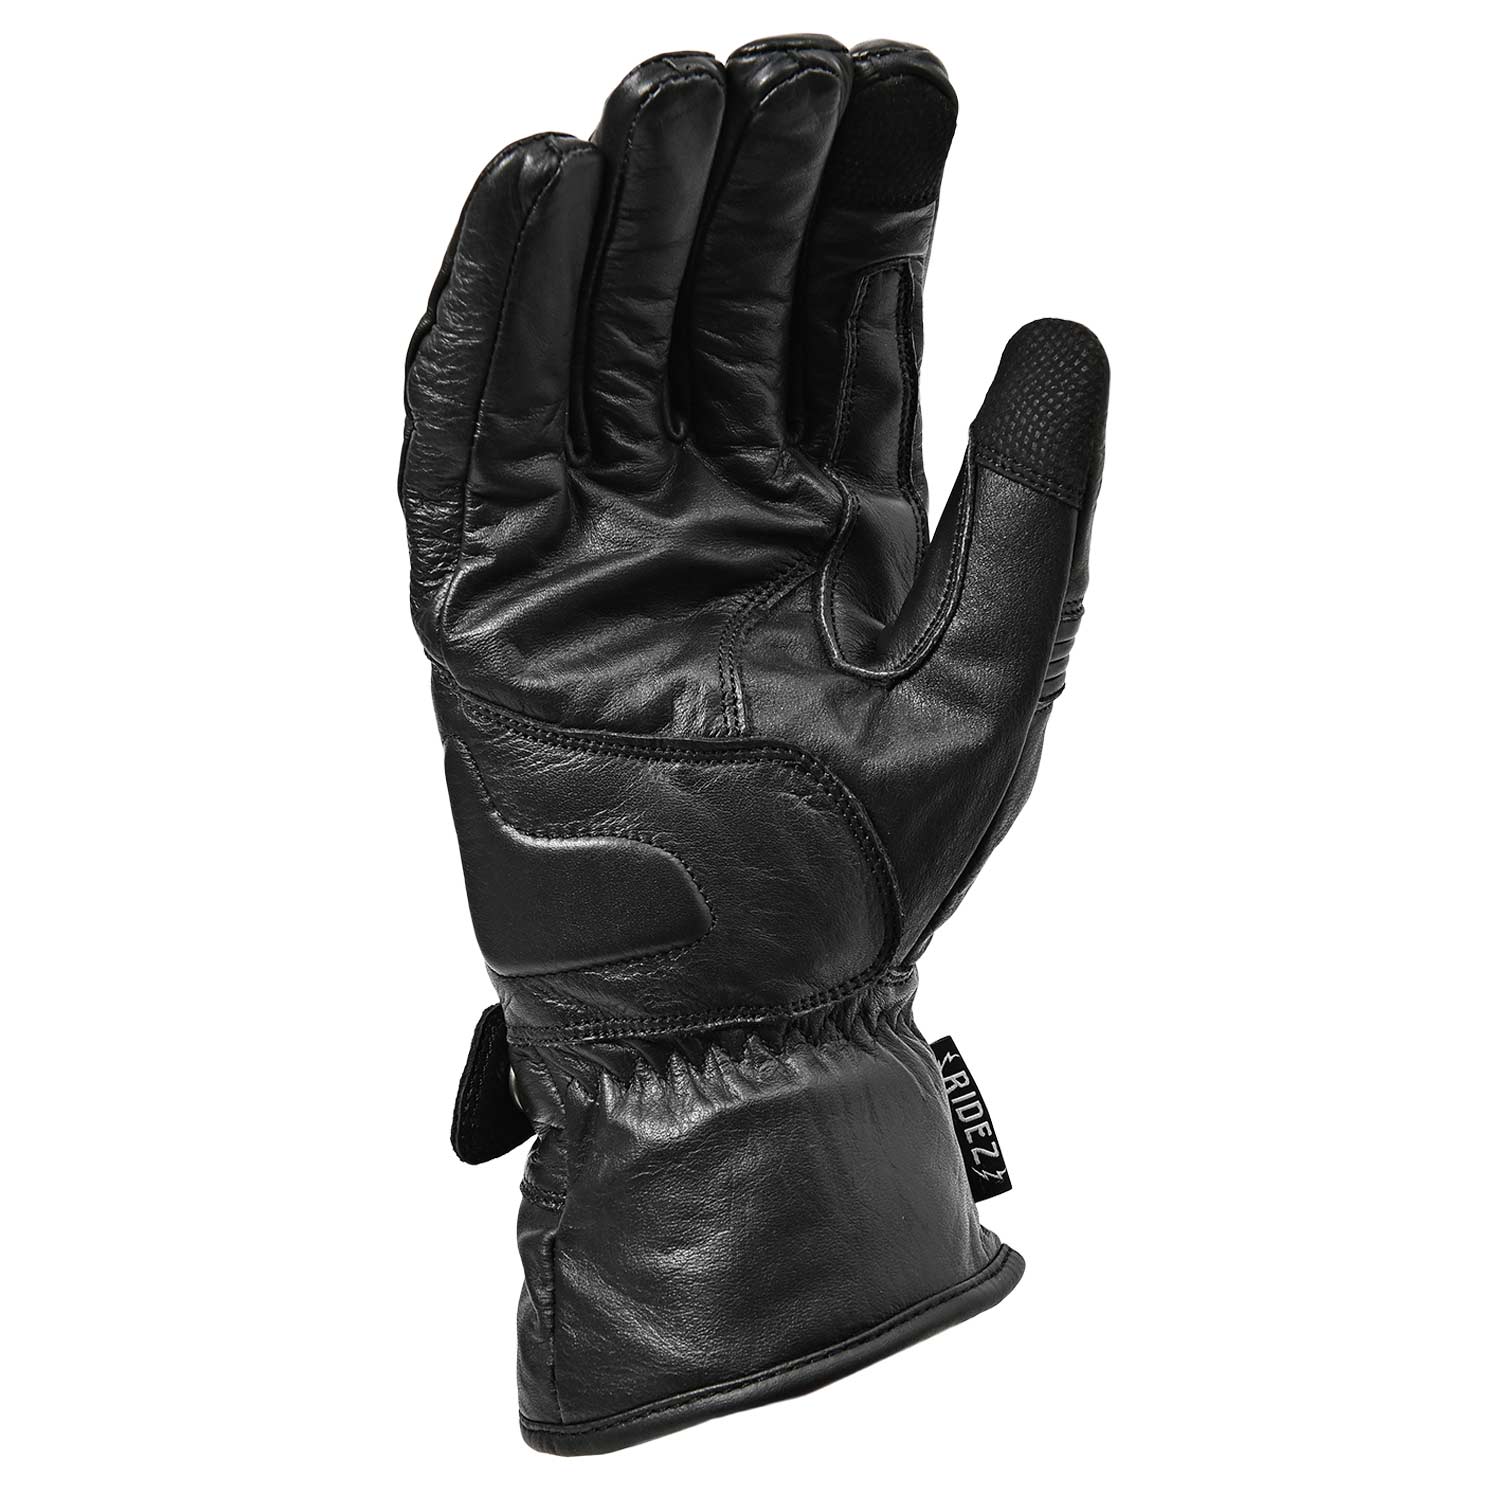 RIDEZ MELD GLOVES Cold Protection Motorcycle Leather Gloves BLACK RWG06